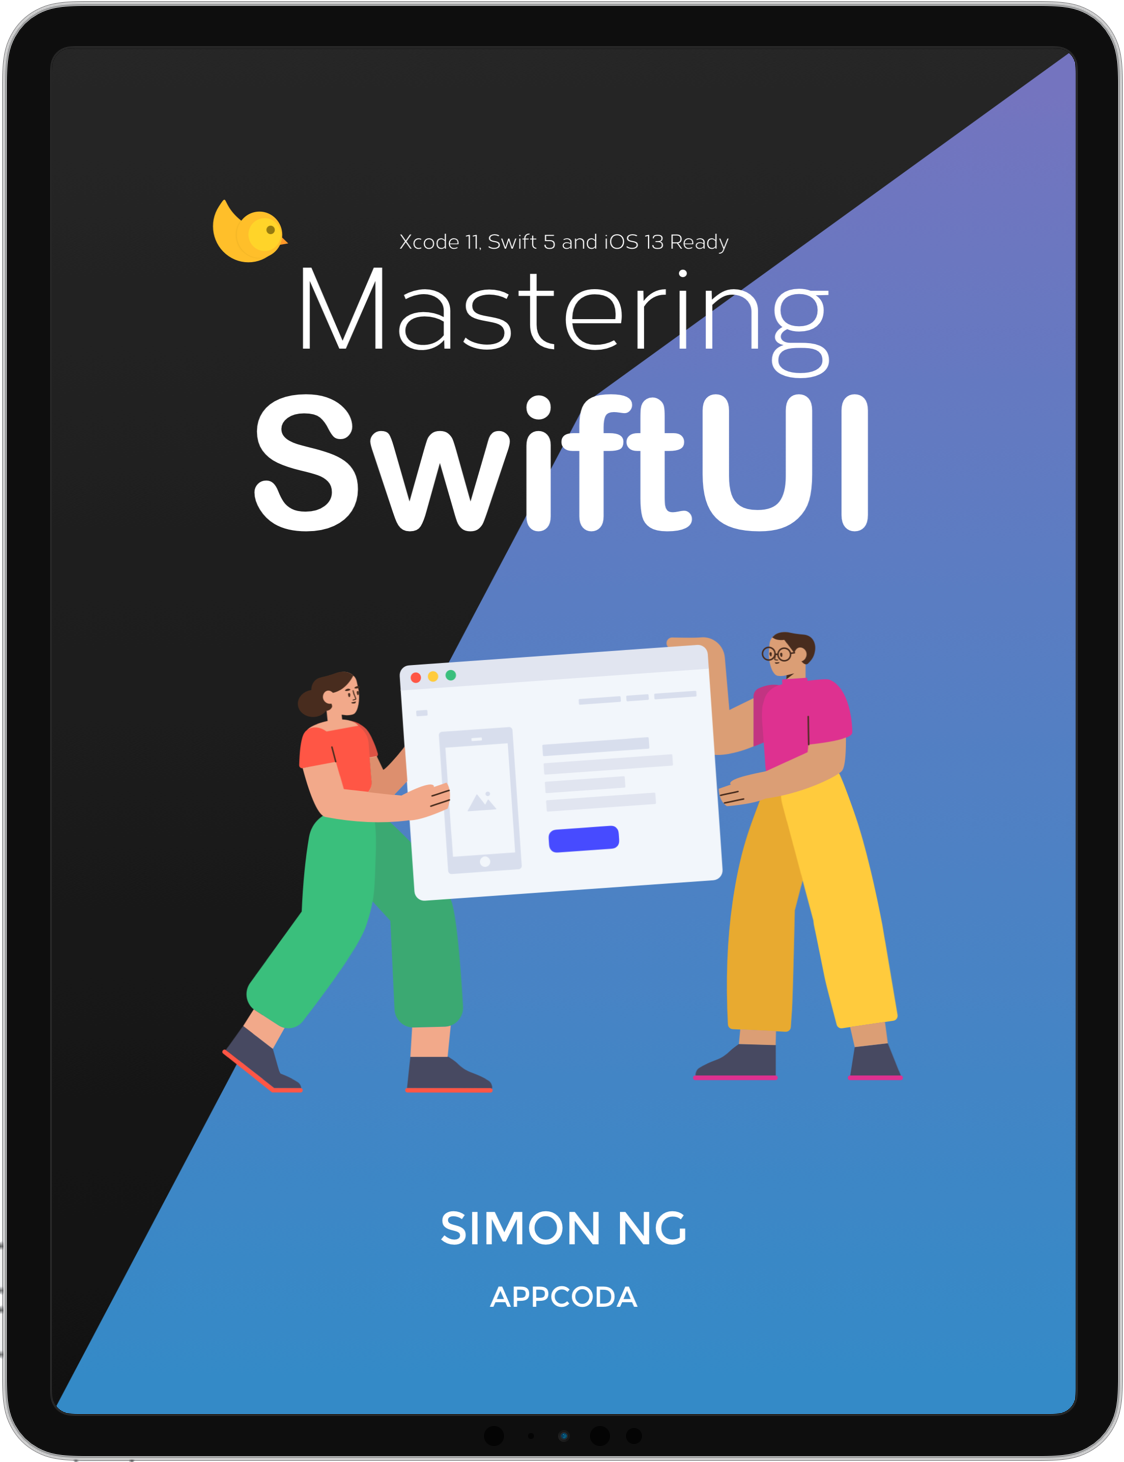 Mastering SwiftUI Book/Course Learn how to build Apps with SwiftUI